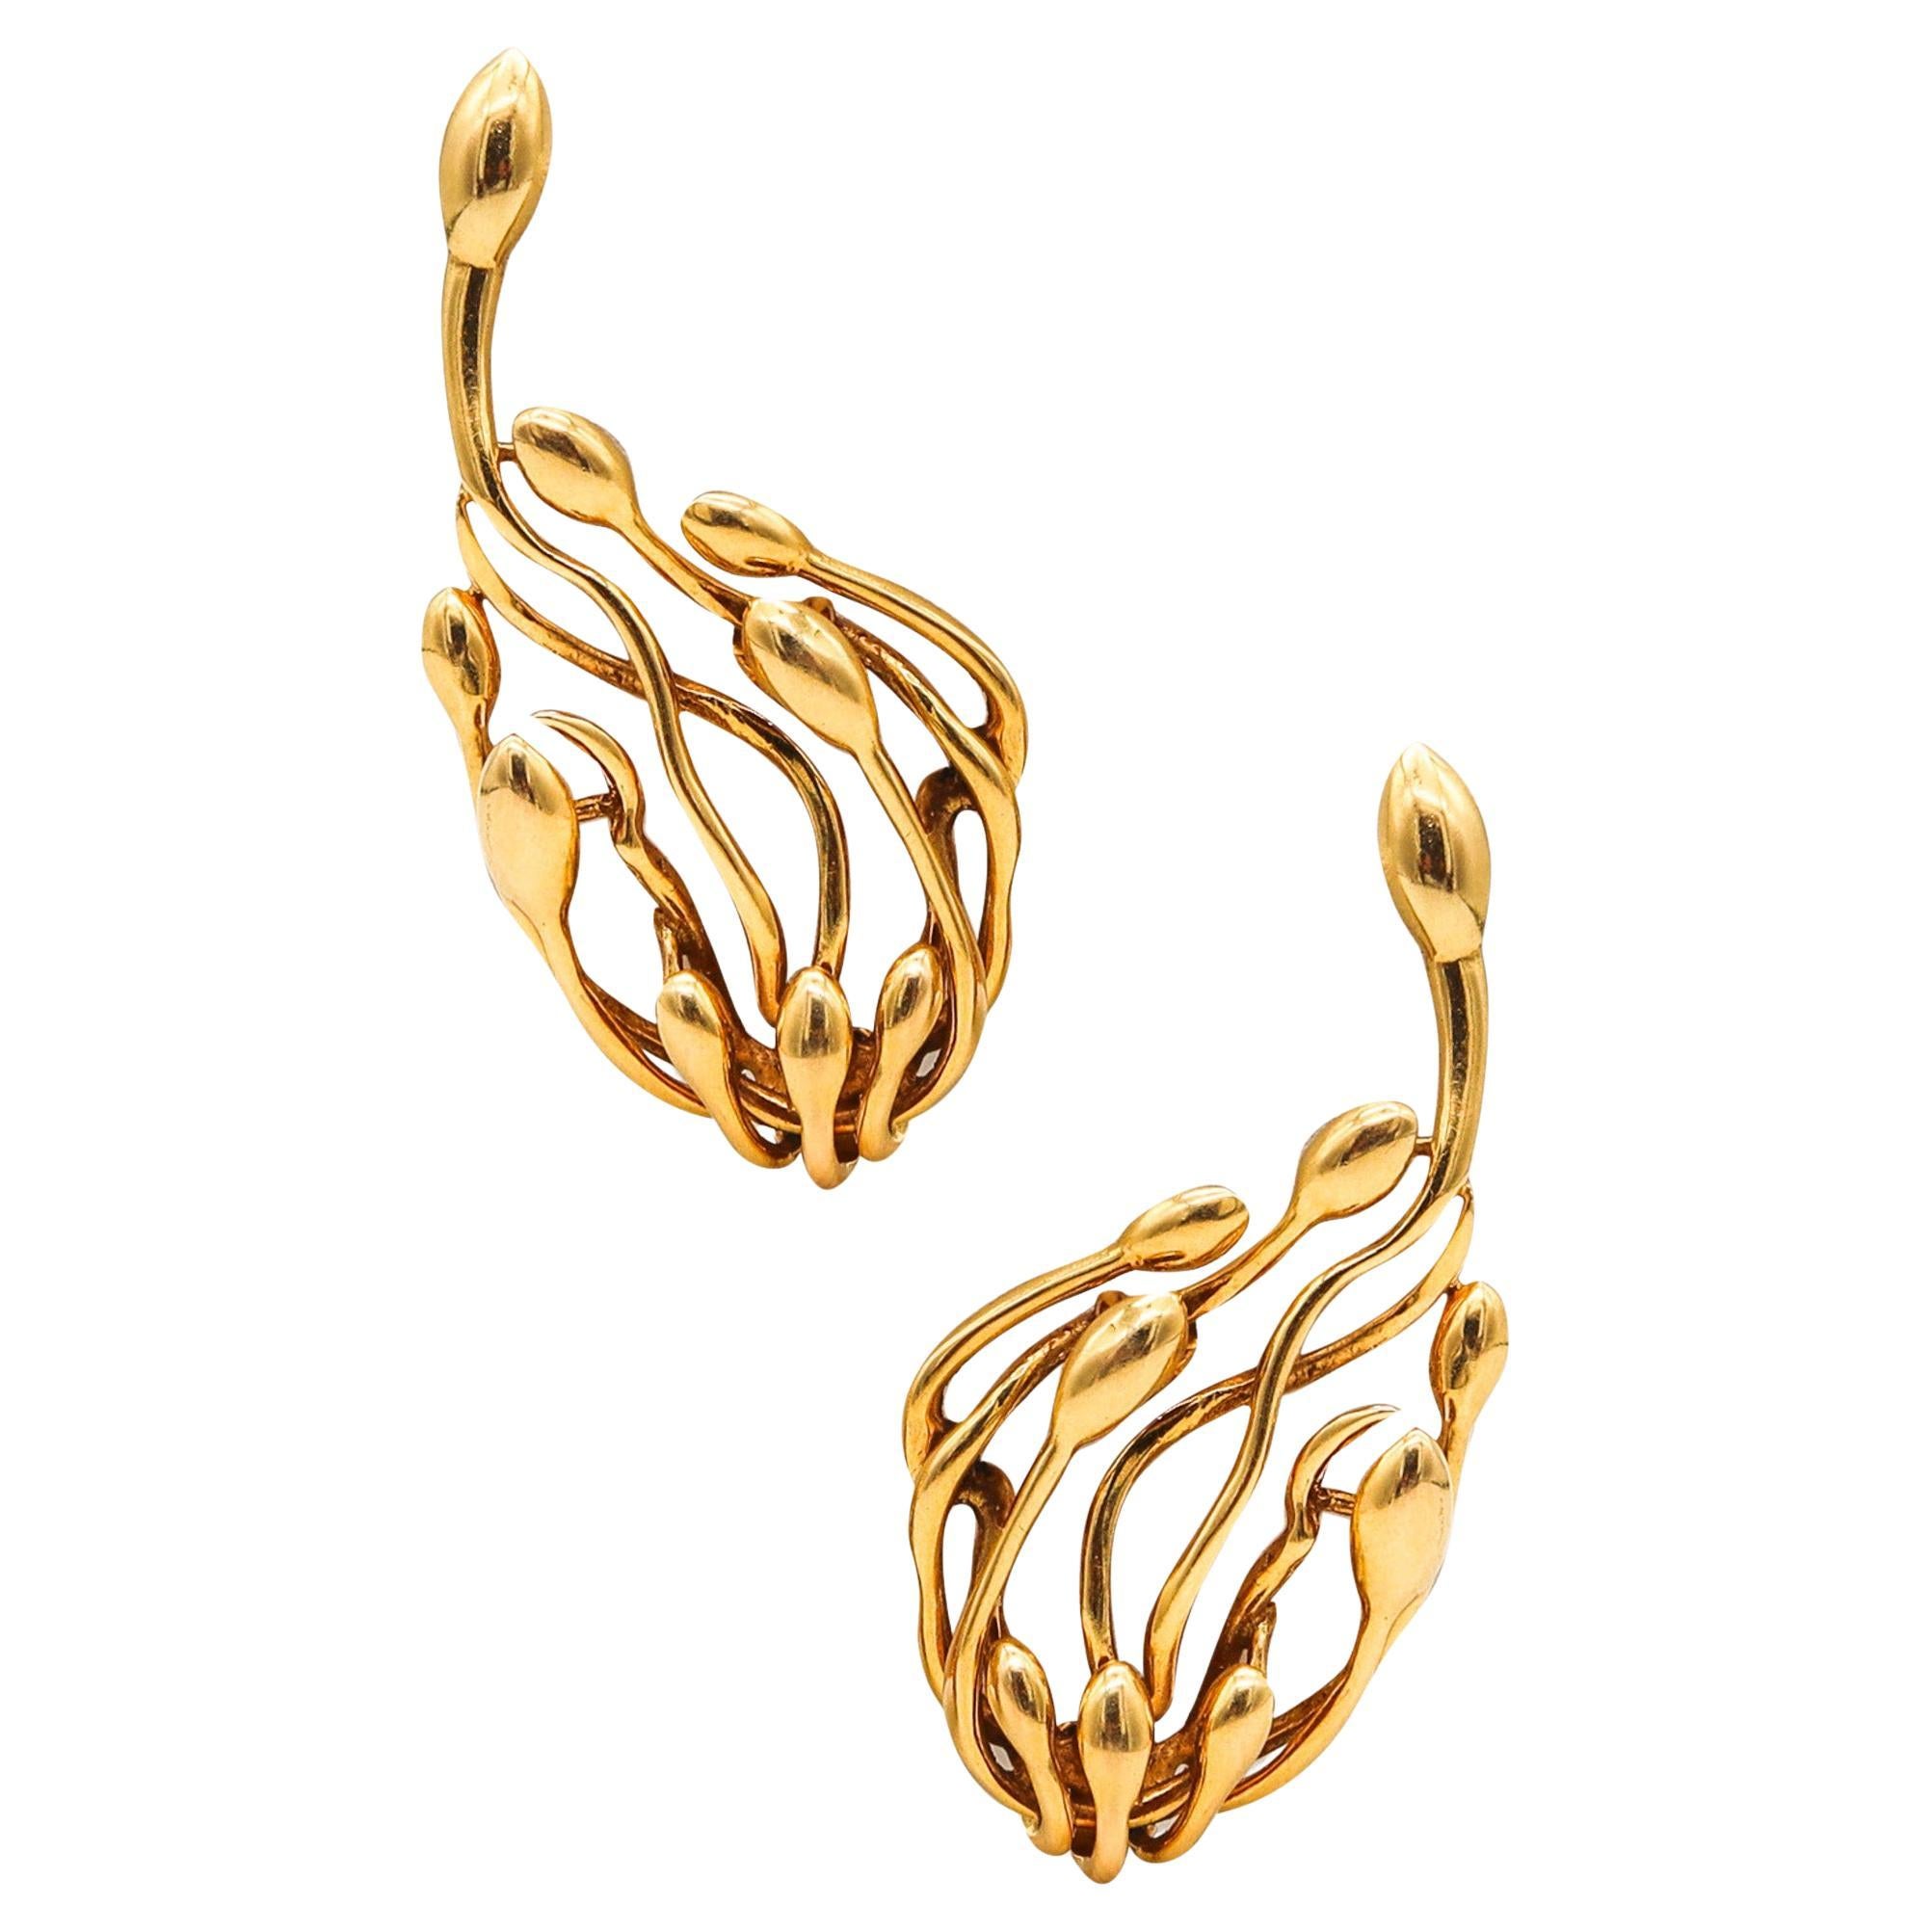 Lalaounis 1970 Paris Biosymbols Free Form Earrings In Solid 18Kt Yellow Gold